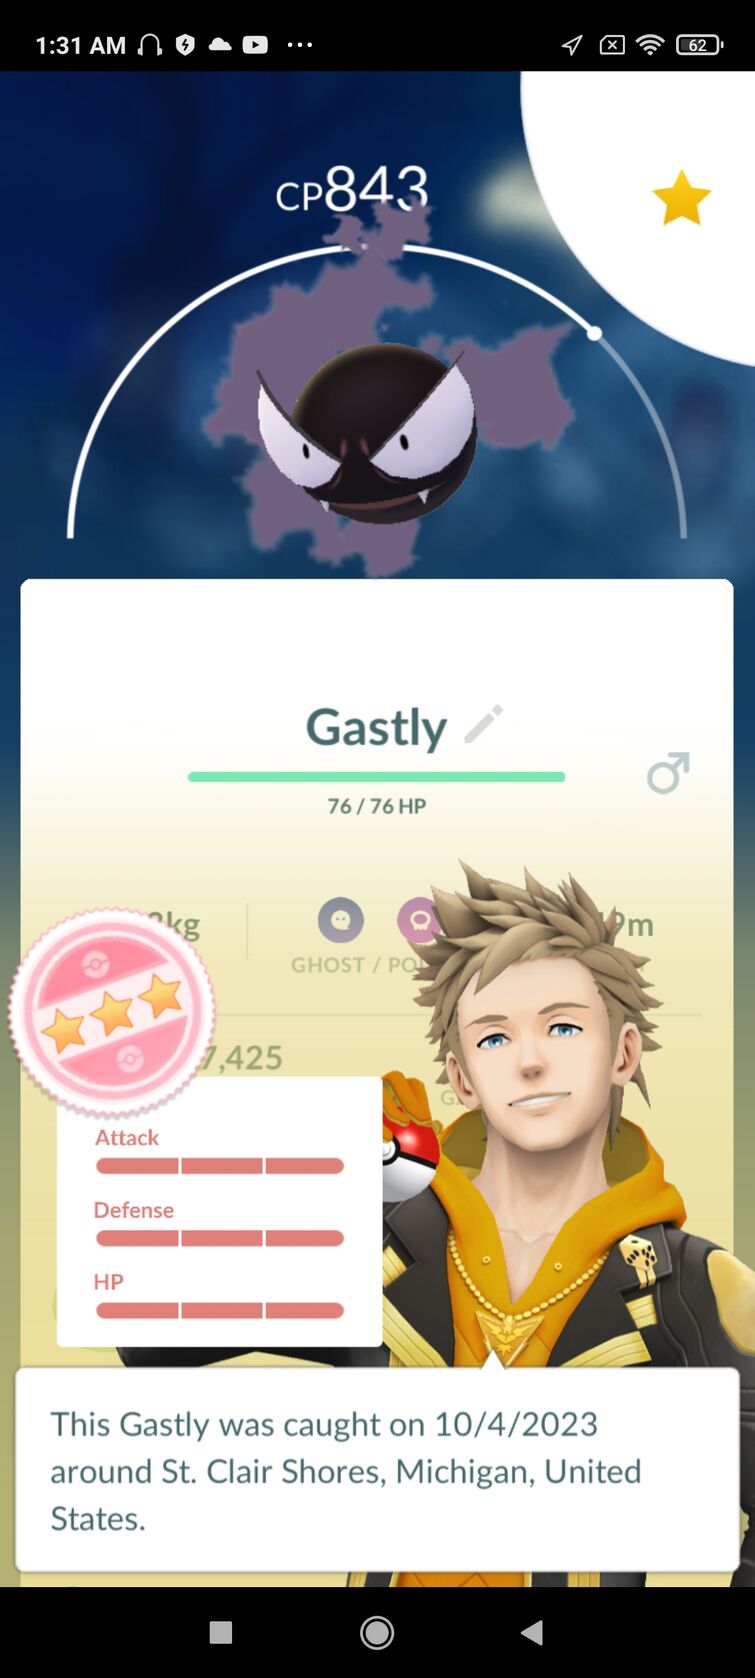 How to catch a shiny Gastly in Pokemon GO